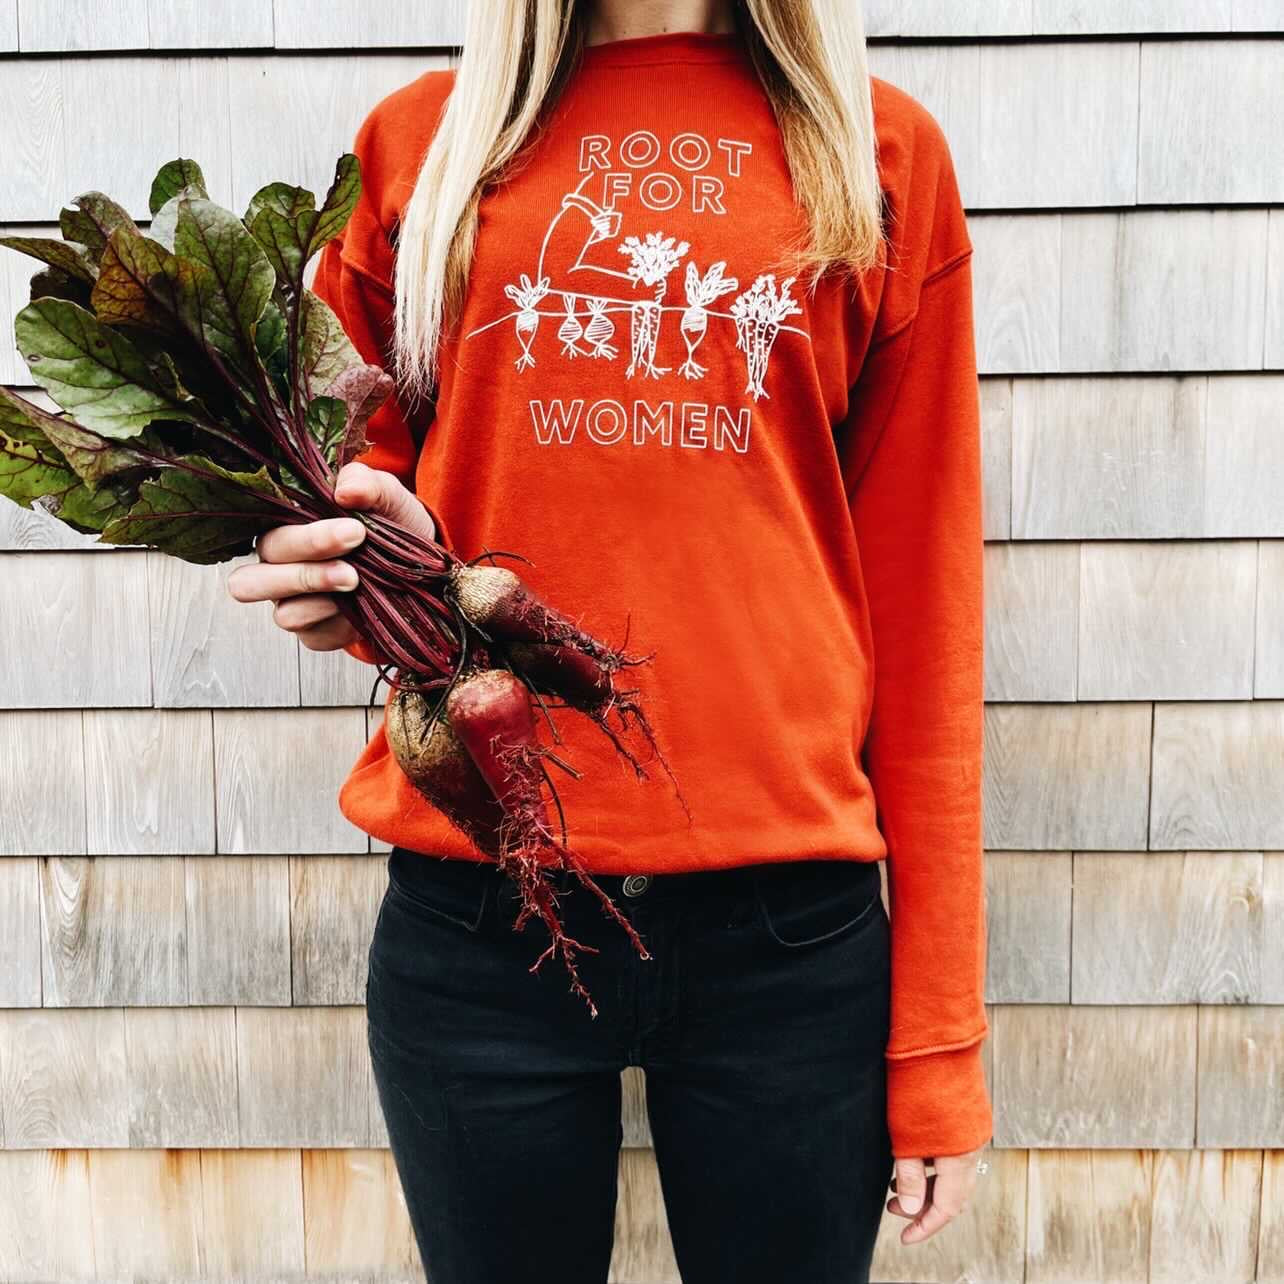 A woman wears a red "Root for Women" crewneck and holds beets